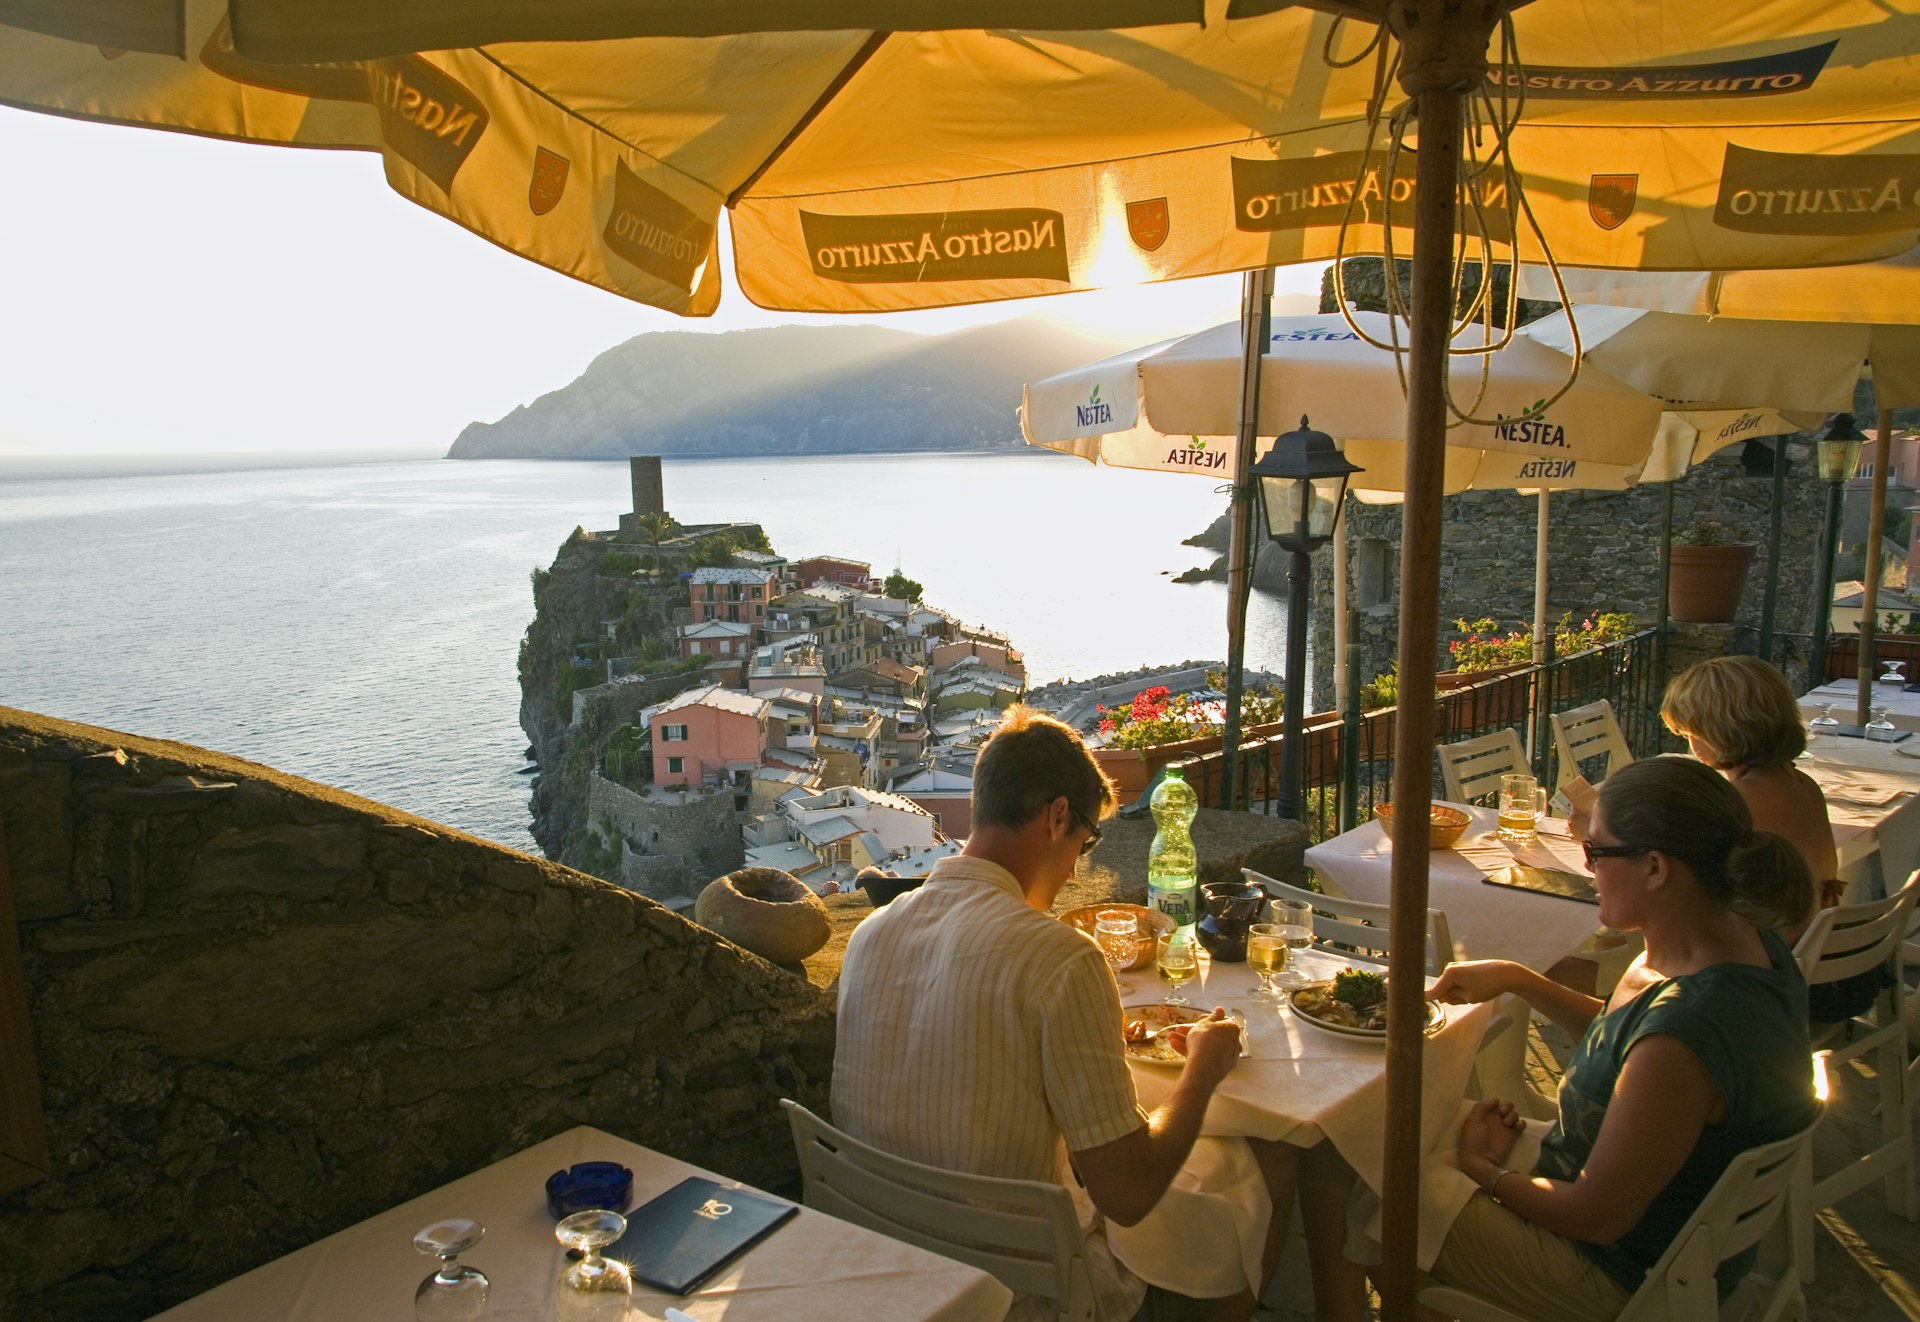 People eating on a restaurant terrace in Vernazza, Cinque Terre